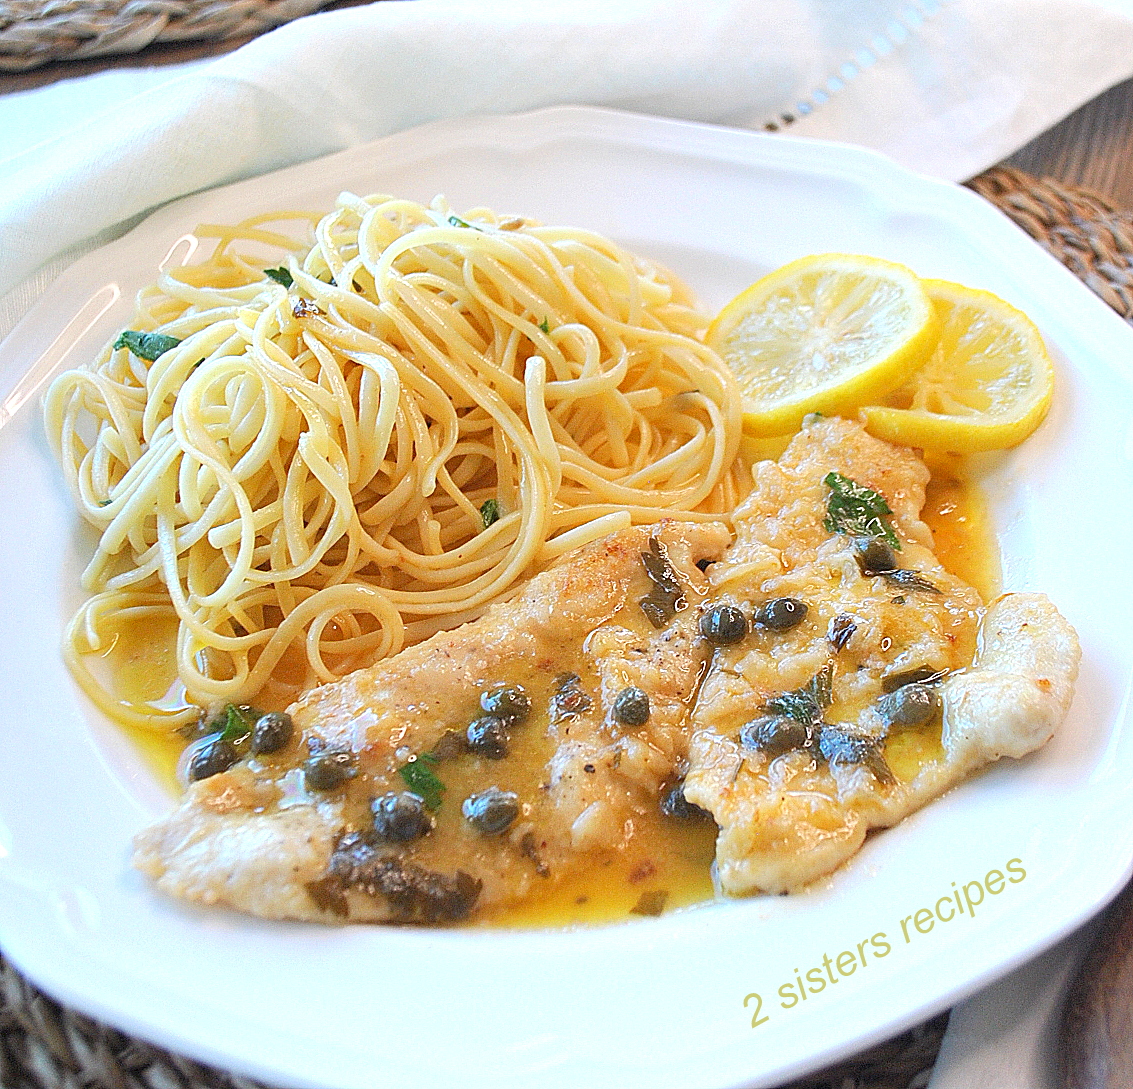 Moms Best Chicken Piccata by 2sistersrecipes.com